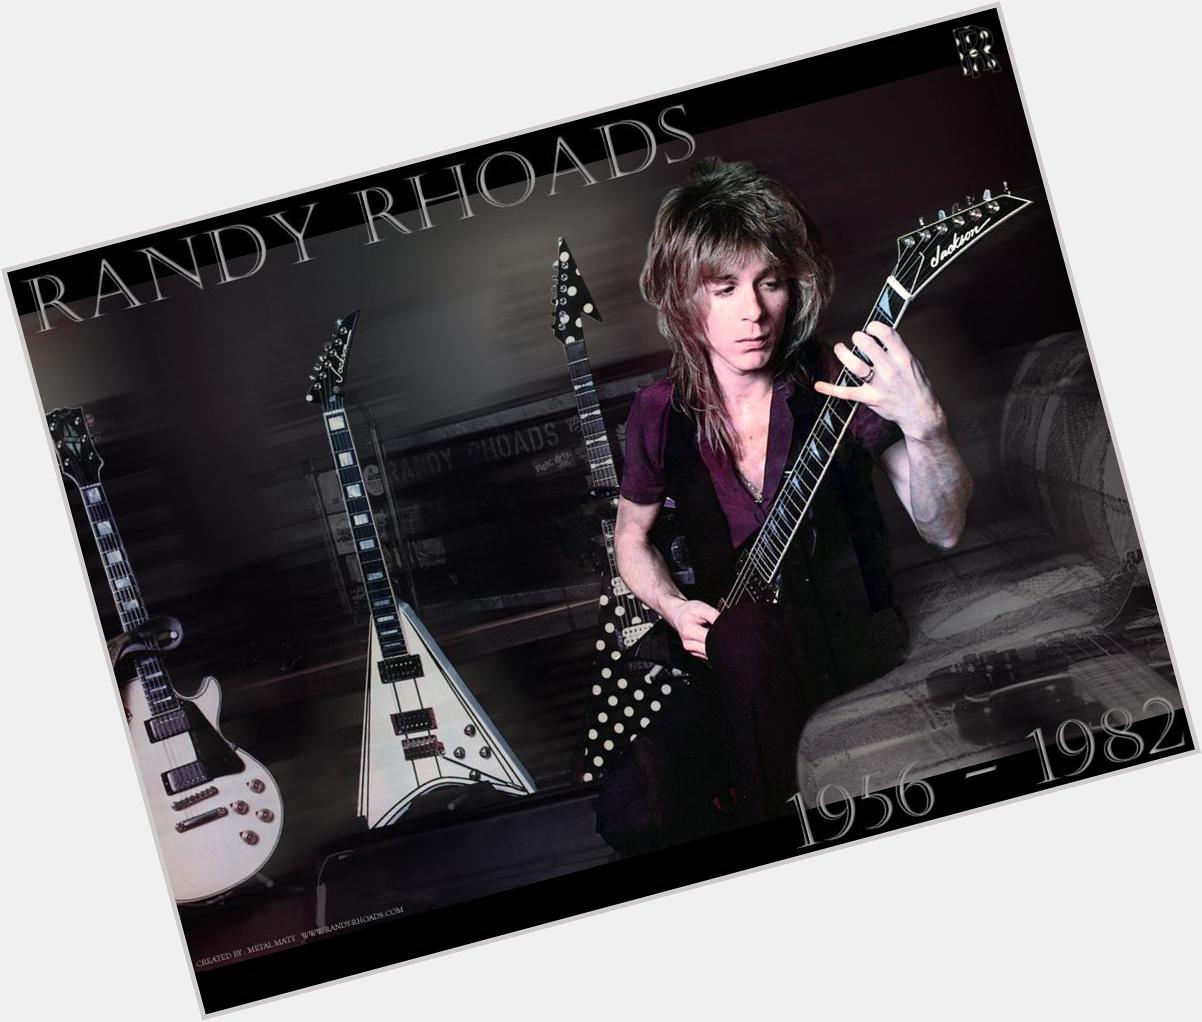 Happy birthday to the late, great Randy Rhoads. He would have been 58 today. 